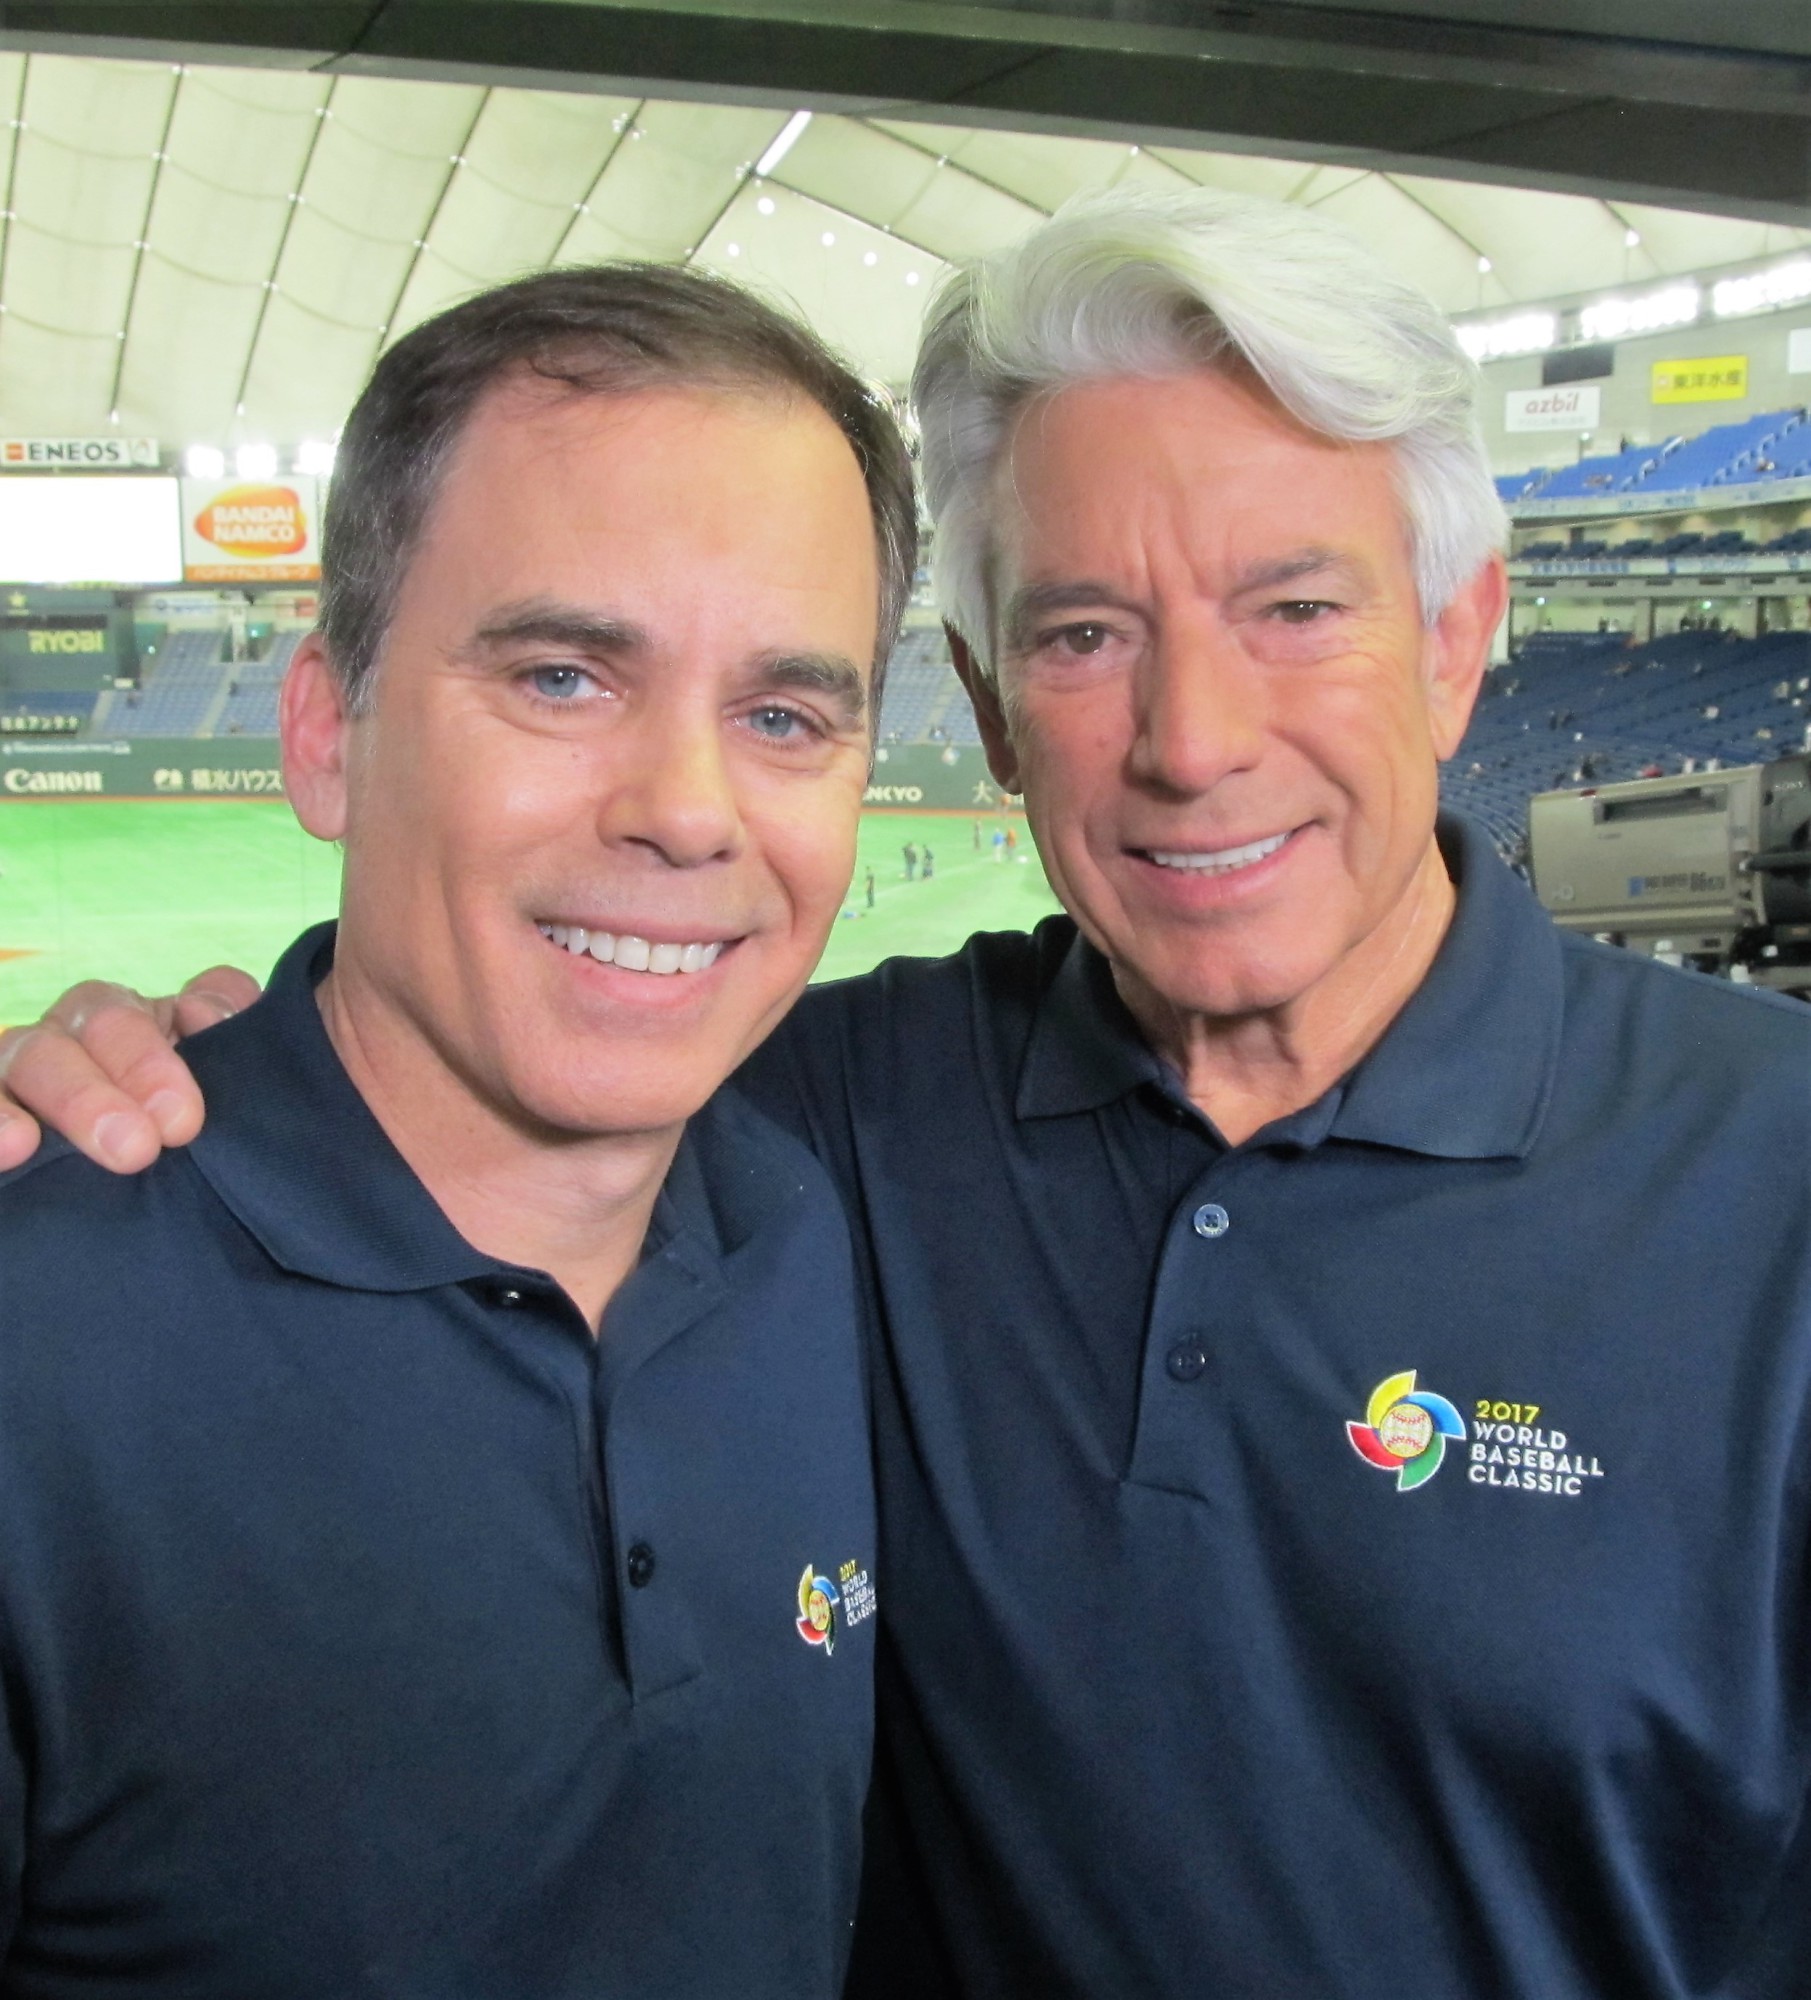 MLB Network's Martinez, Waltz inform and entertain during WBC telecasts -  The Japan Times